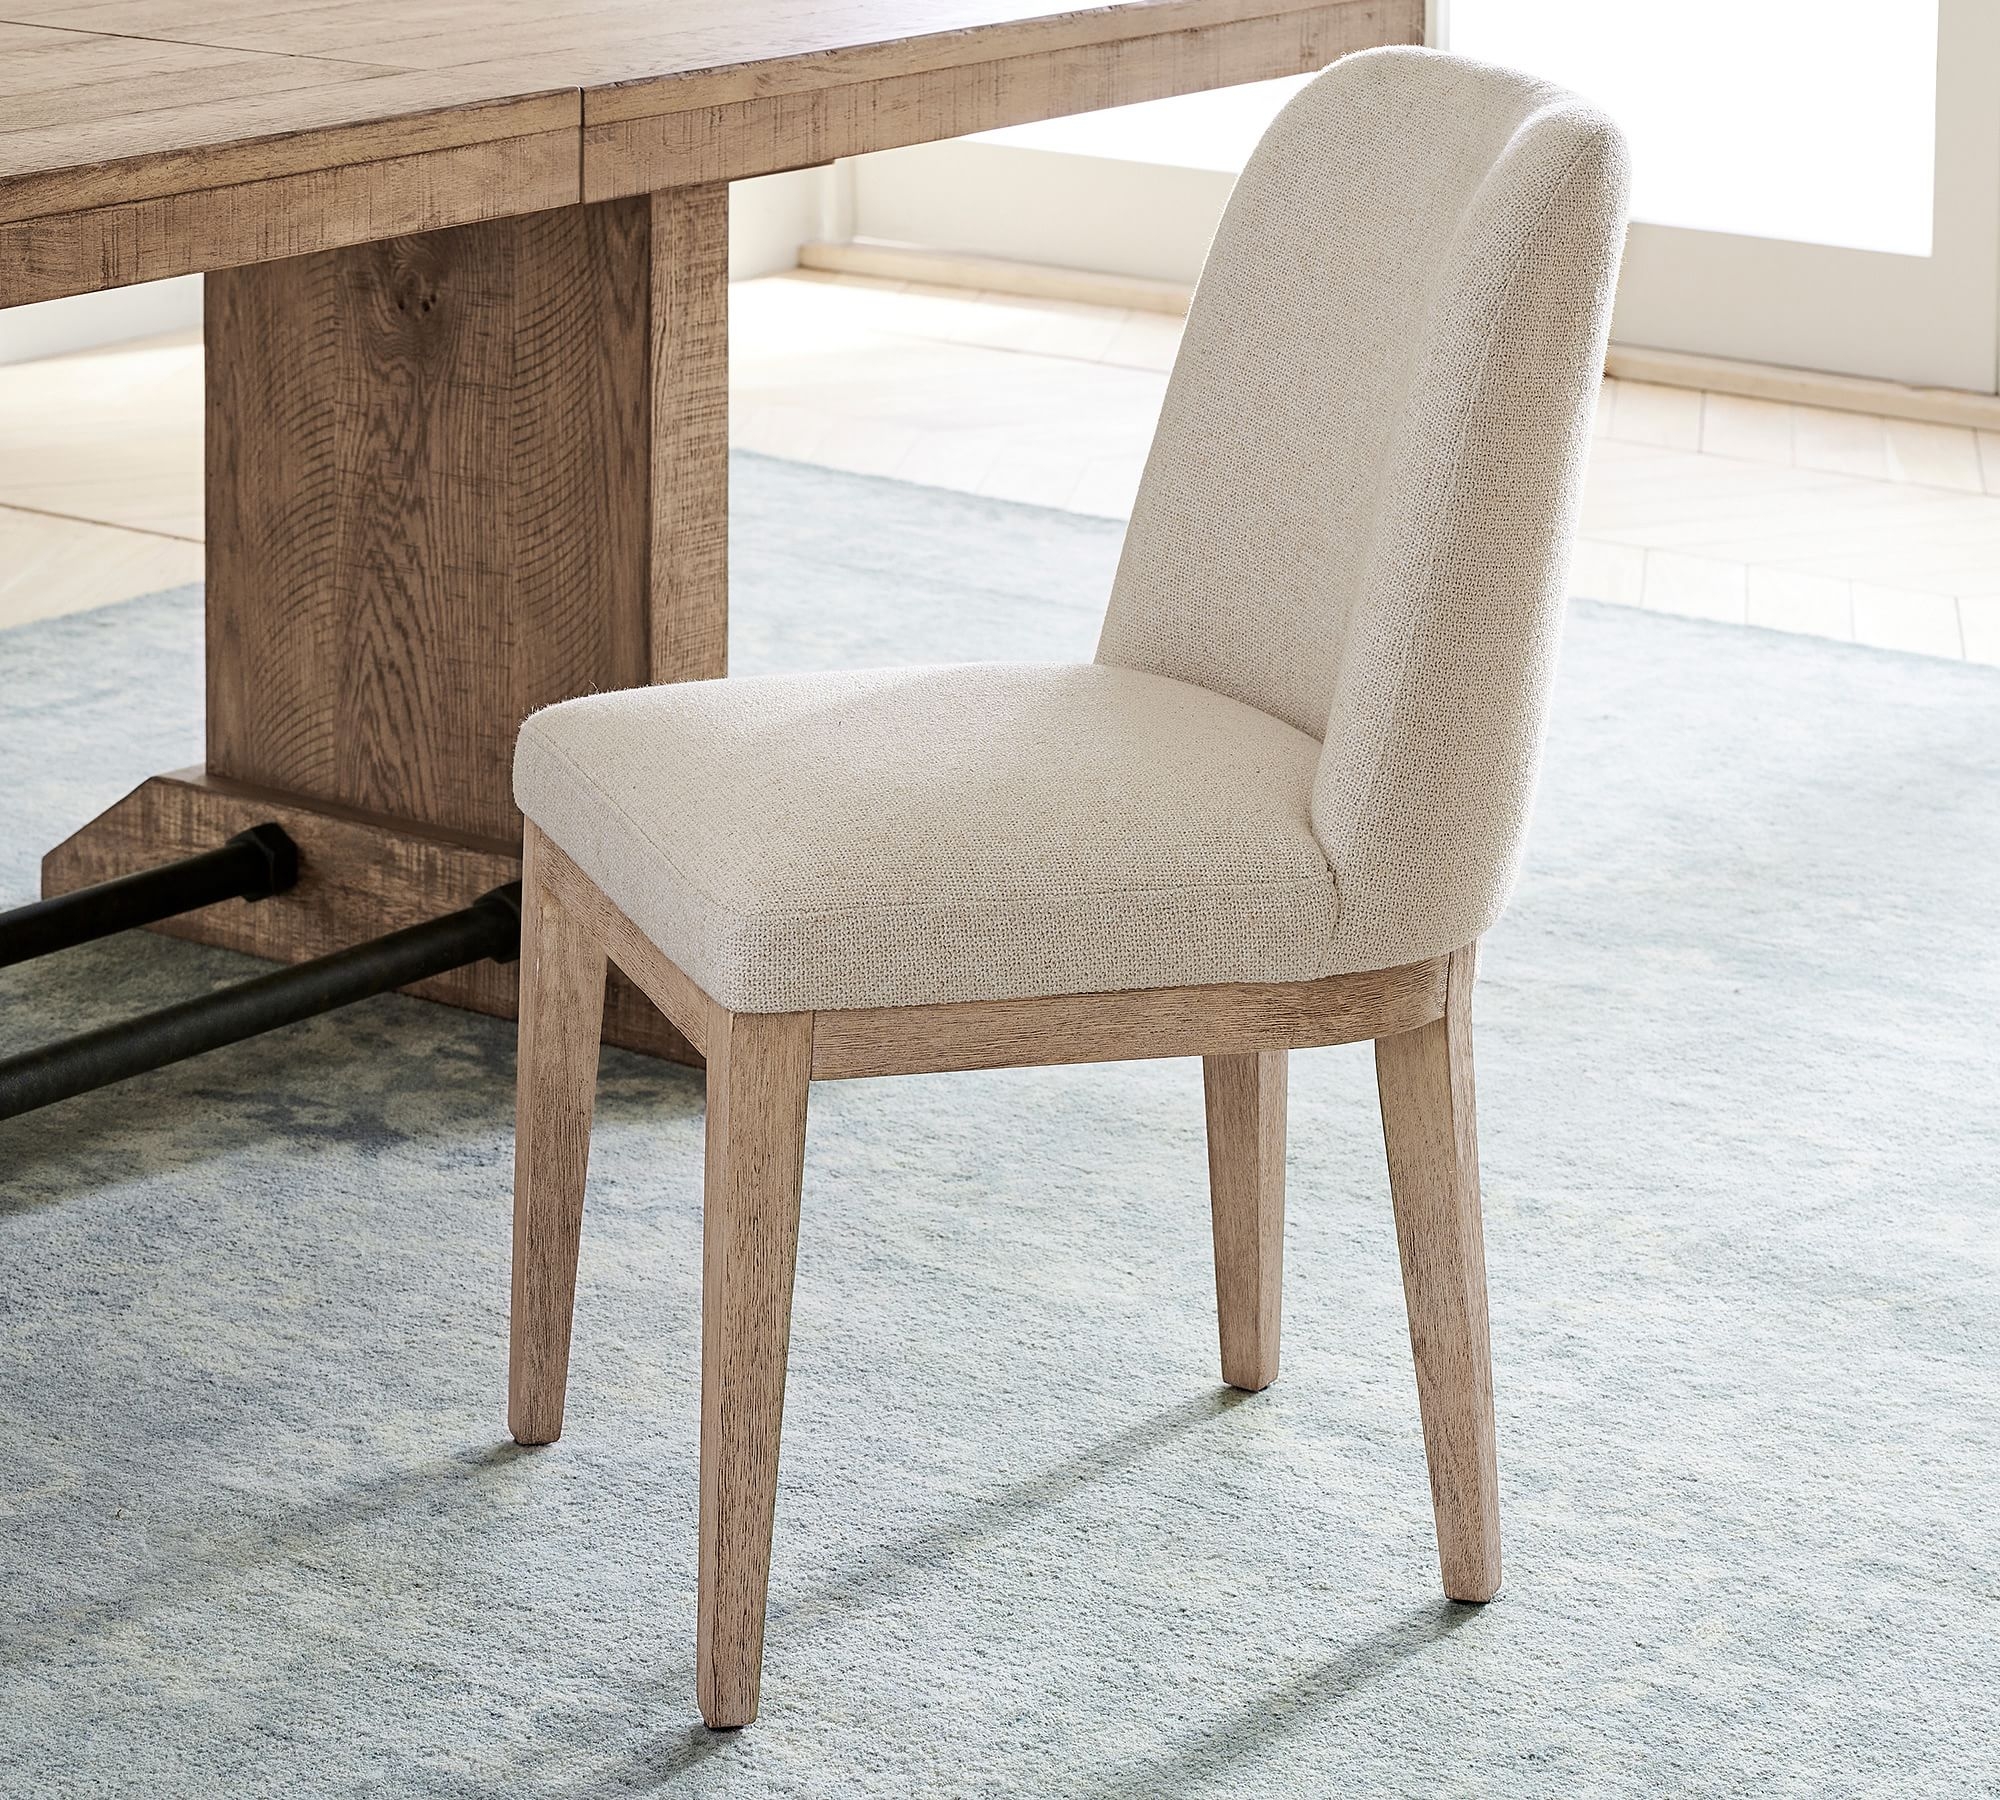 Layton Upholstered Side Dining Chair, Seadrift Legs, Performance Boucle Oatmeal - Image 1